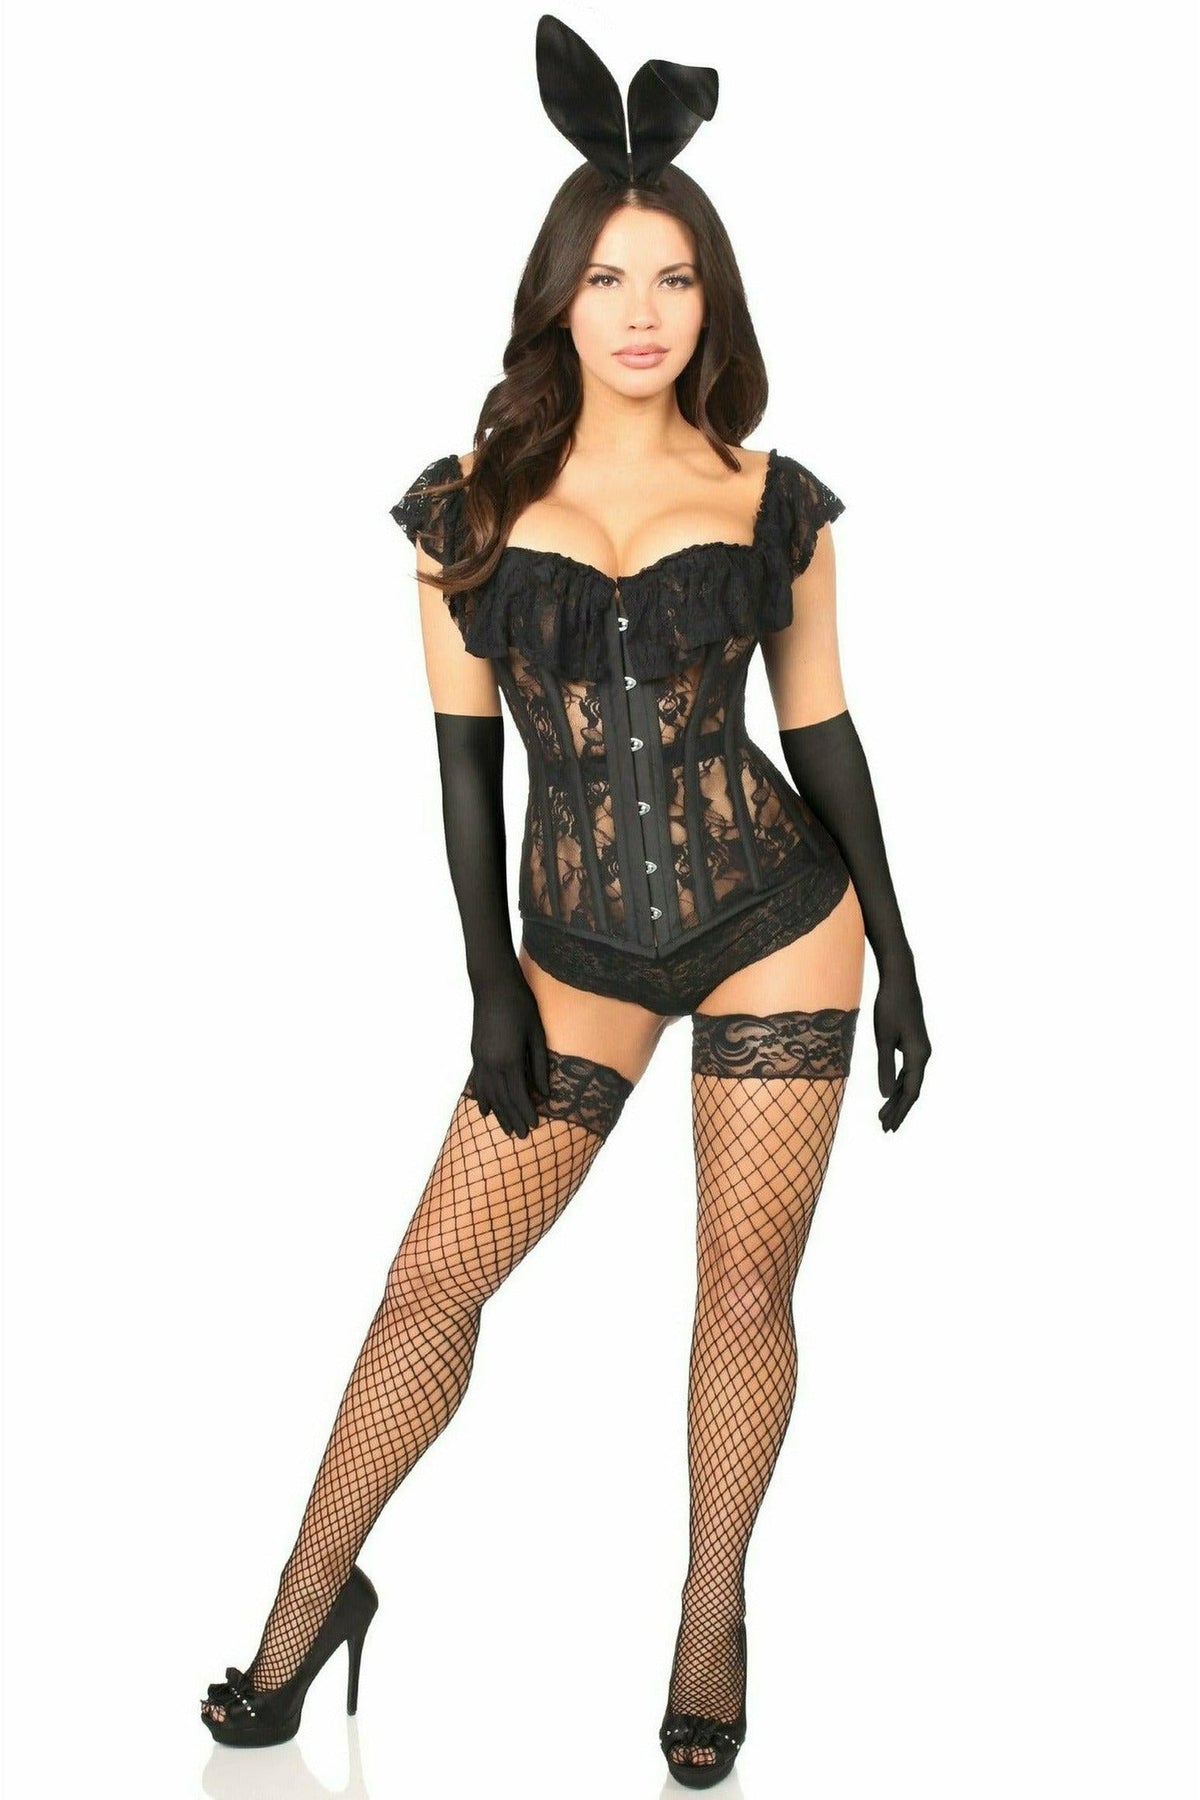 Daisy Corsets Top Drawer 4 PC Sheer Lace Bunny Corset Costume